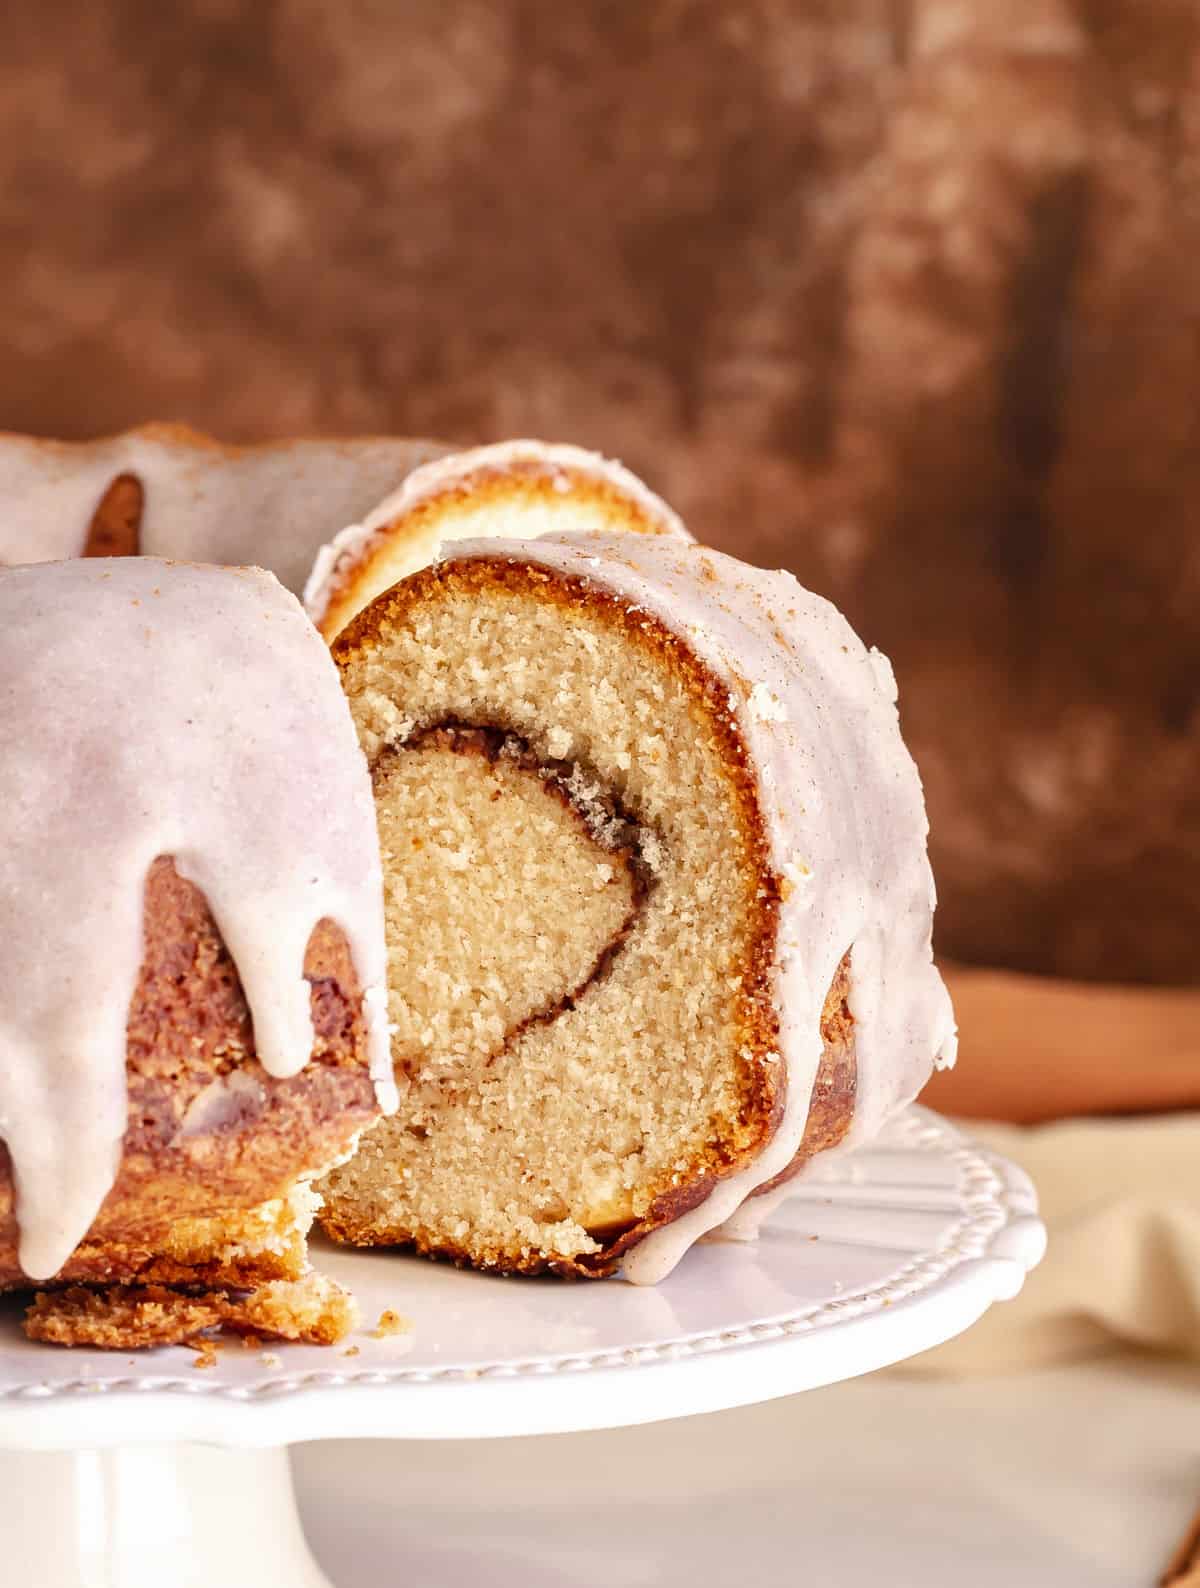 Glazed slice of cinnamon swirl bundt cake on a white cake stand with rest of cake. Brown background.